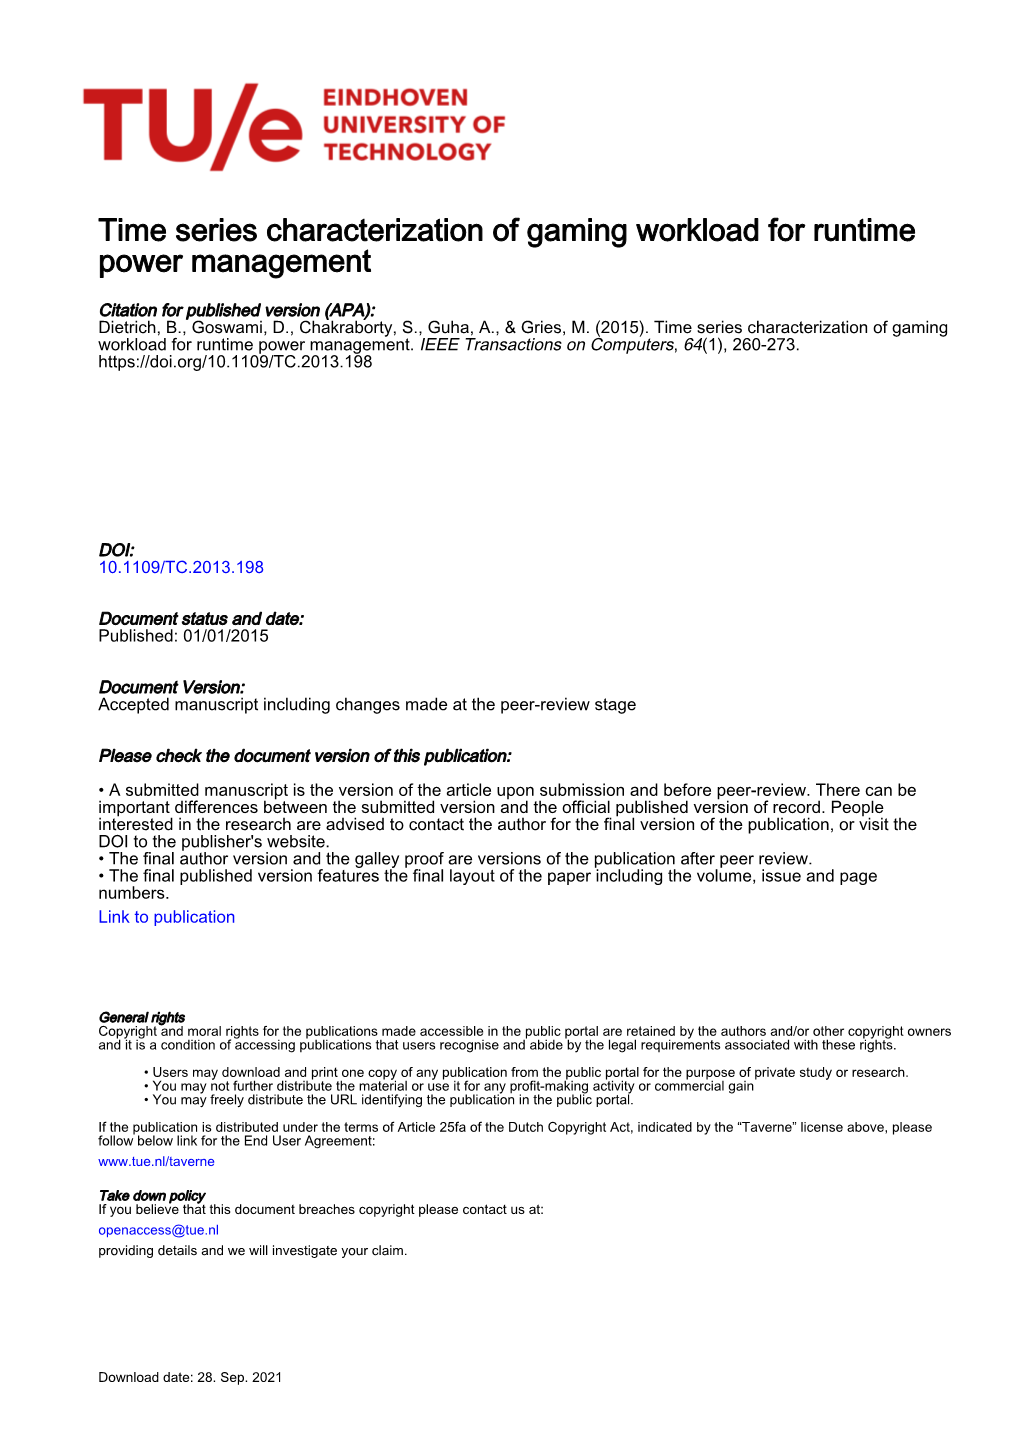 Time Series Characterization of Gaming Workload for Runtime Power Management